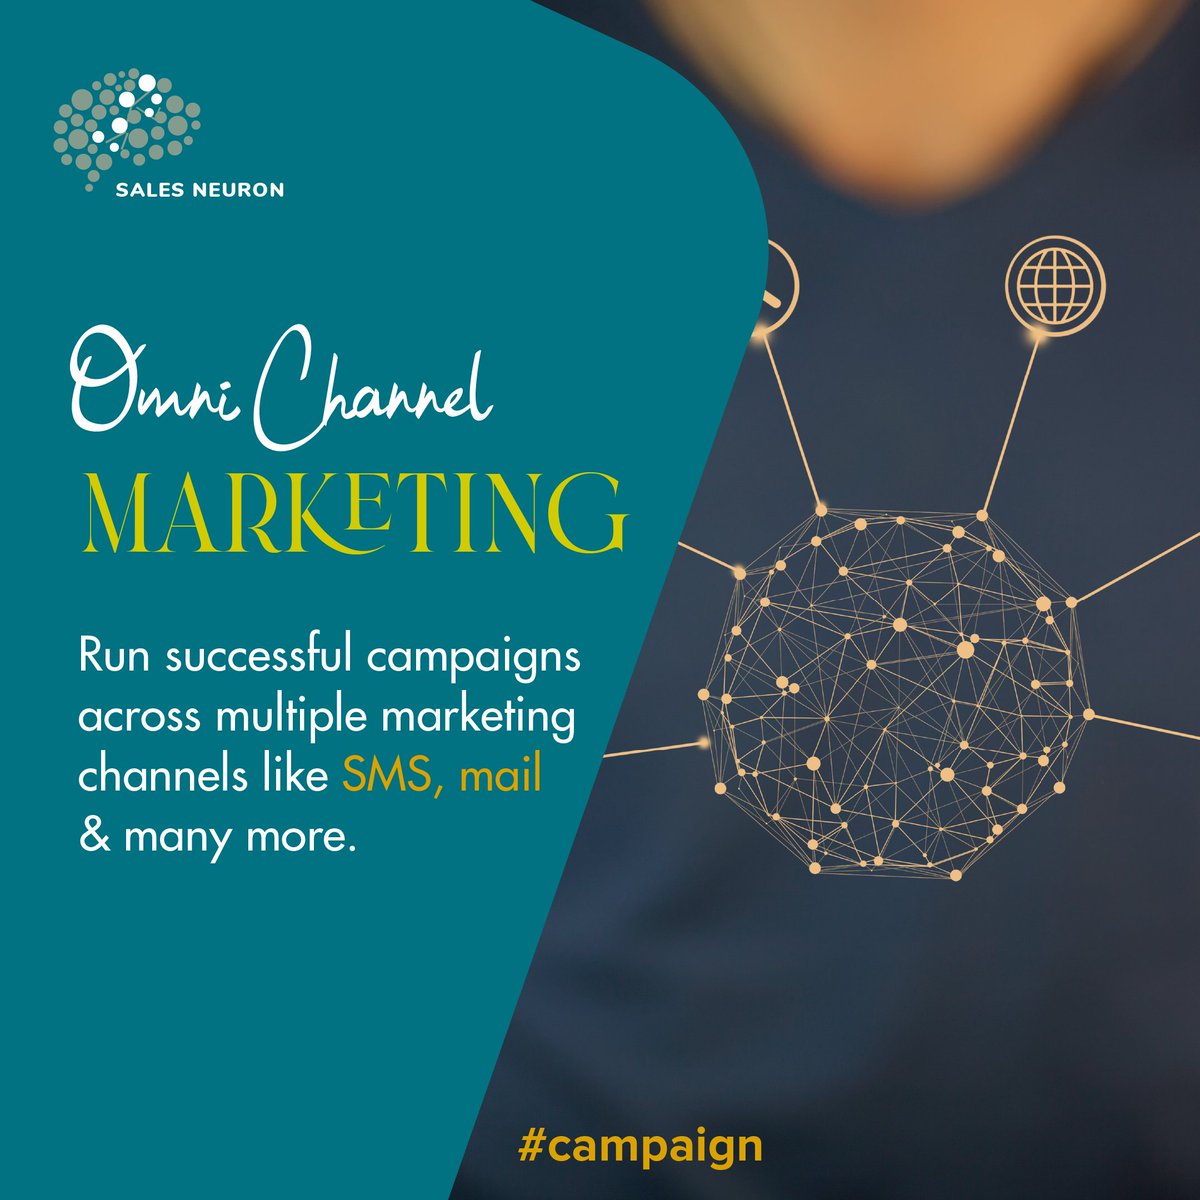 Unlock the power of multi-channel success! Drive impactful campaigns through SMS, email, WhatsApp, and more.

#MultiChannelMarketing #CampaignSuccess